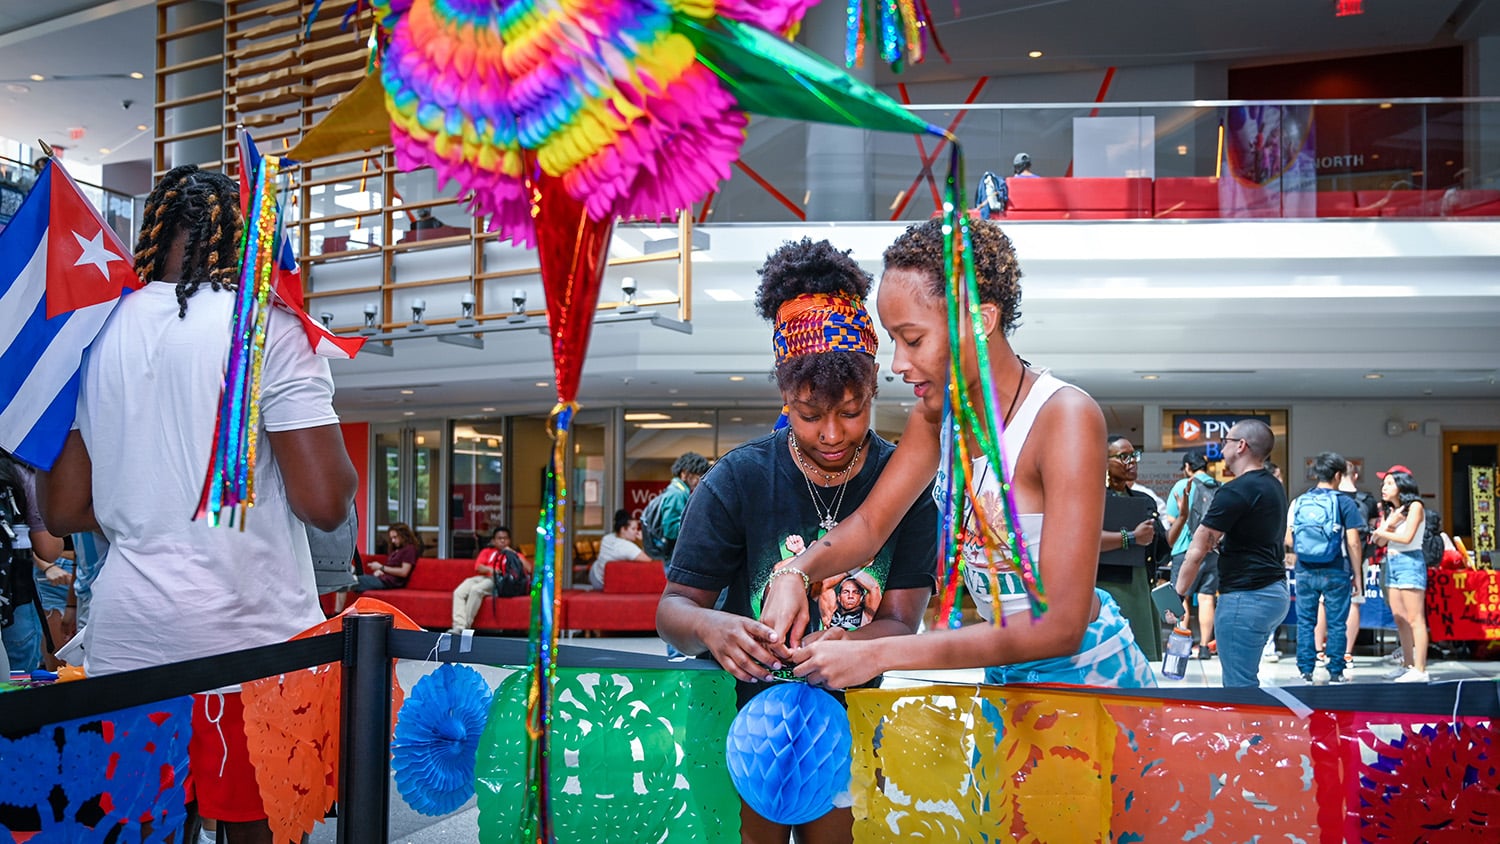 Students prepare the pinata area at an event for Latinx Heritage Month.